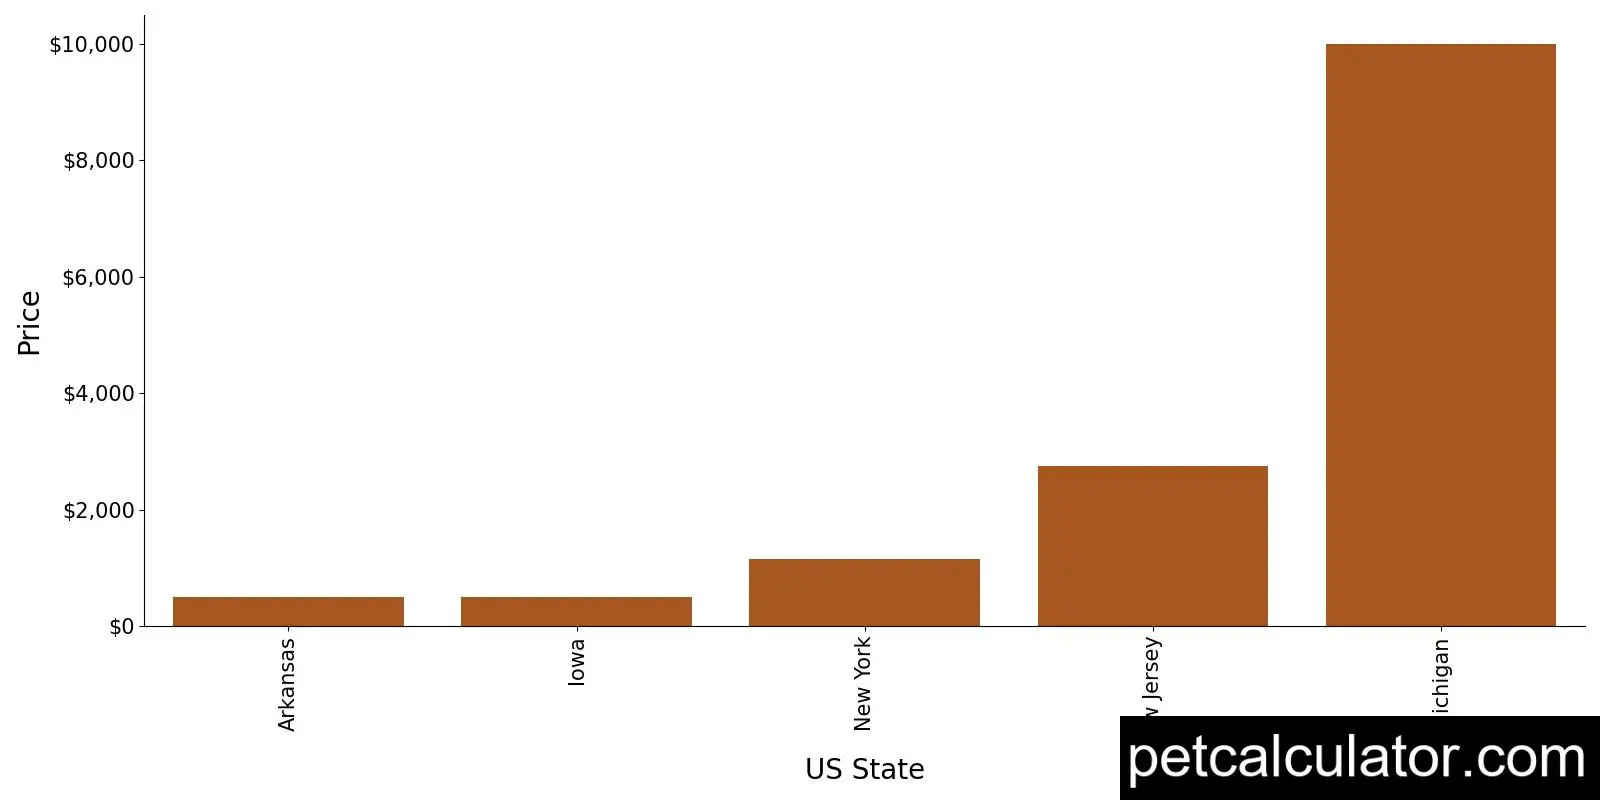 Price of Affenpinscher by US State 